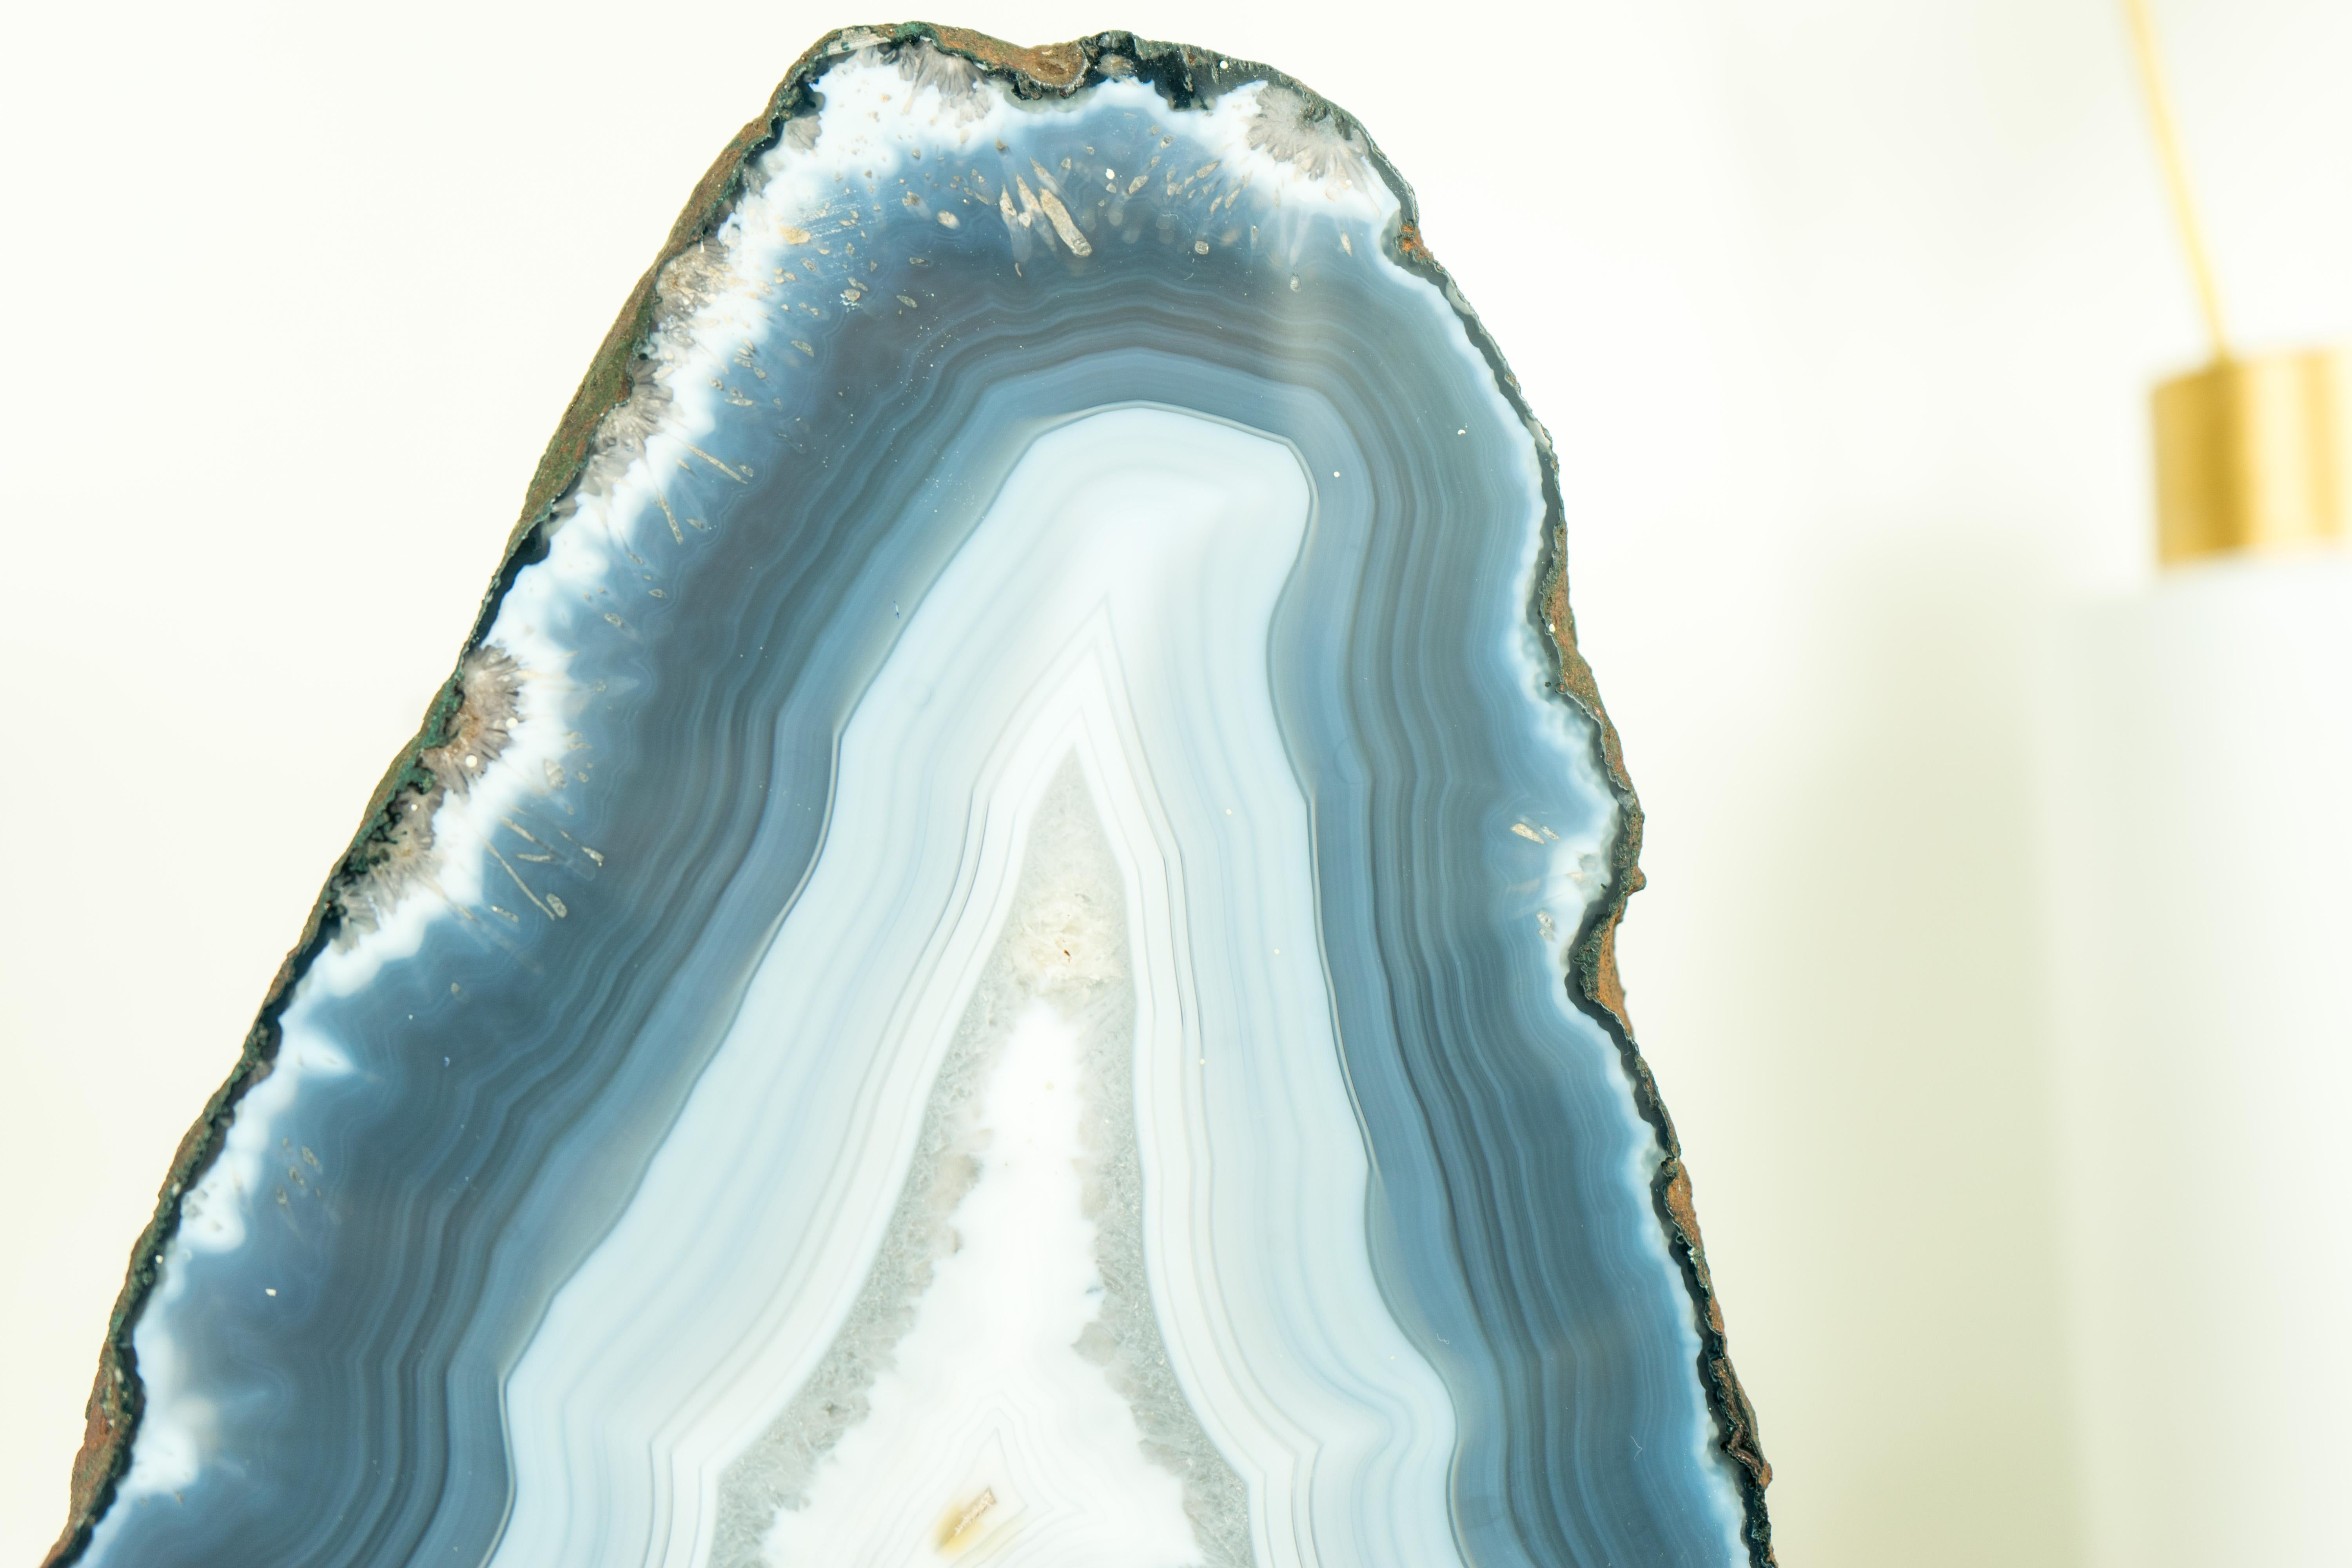 Brazilian Blue Lace Agate Geode with Rare Inclusions, a Natural Artwork For Sale